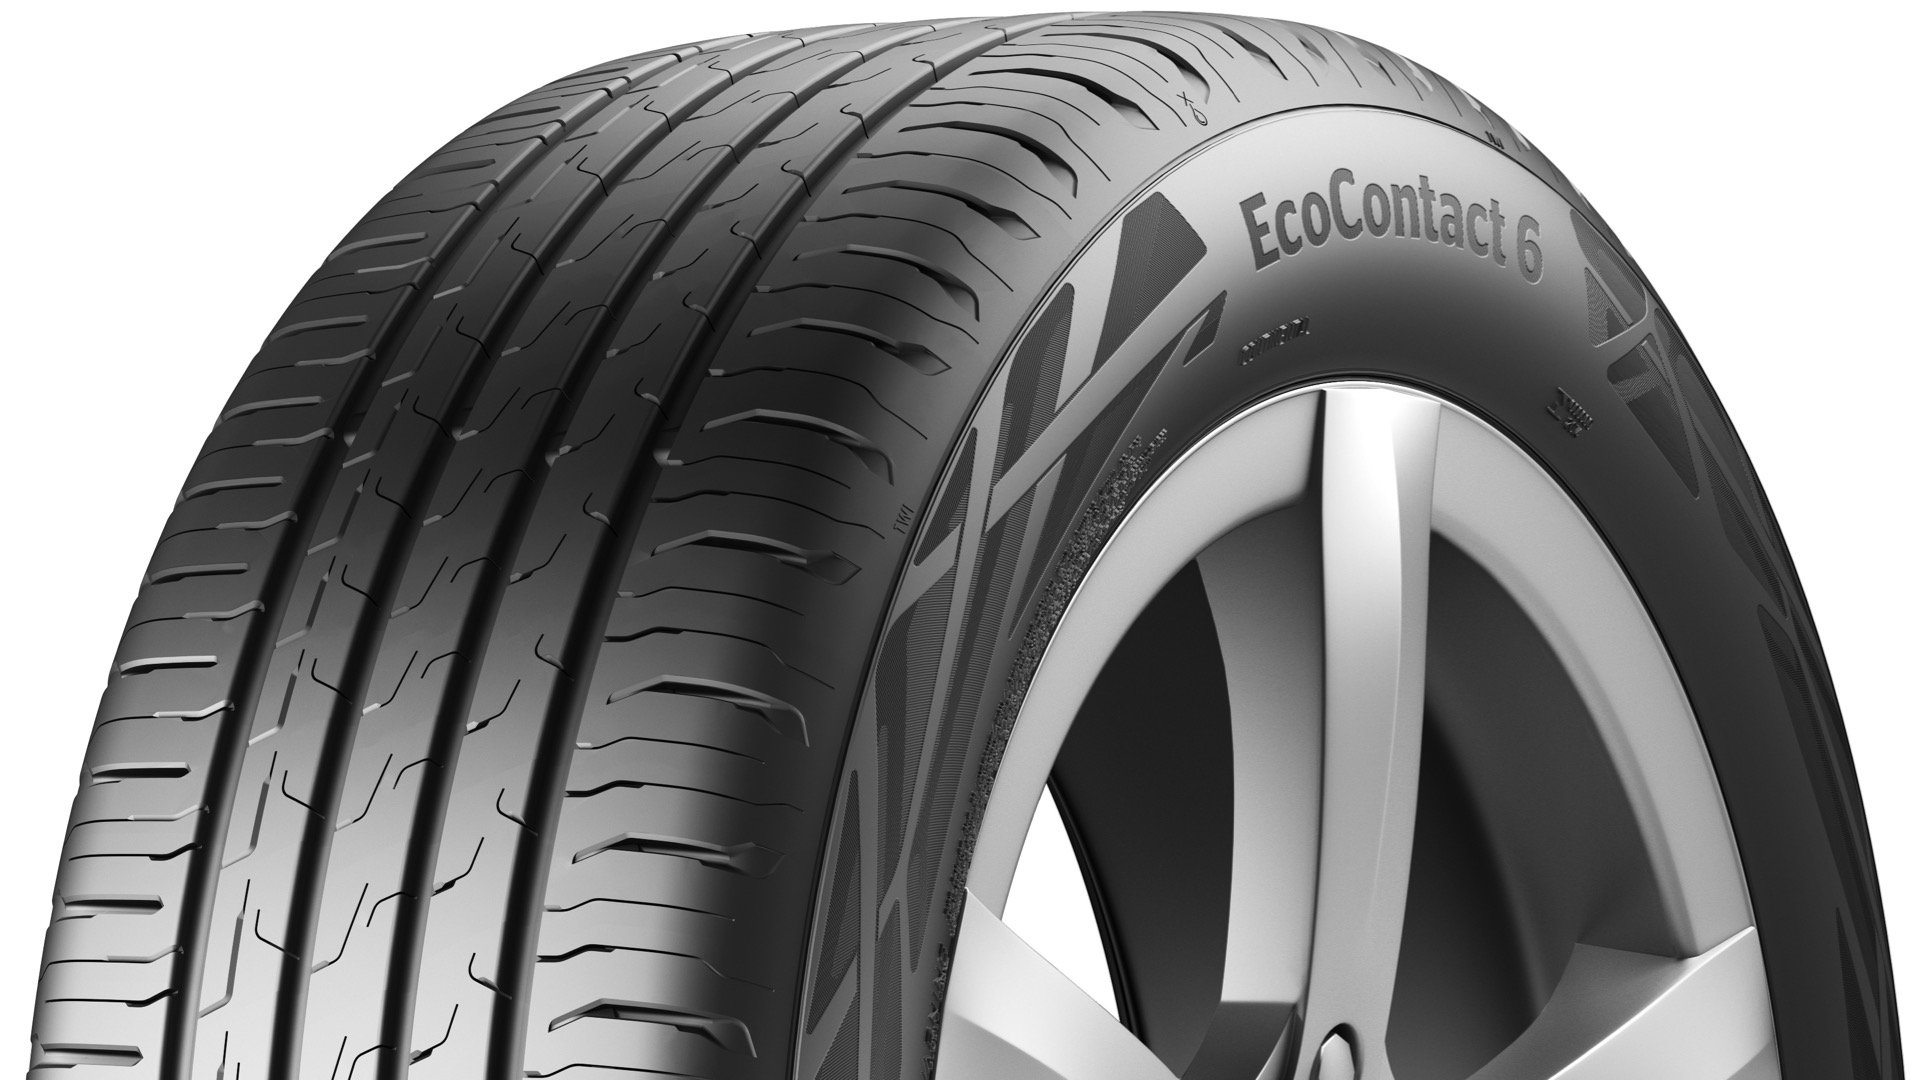 Tire Rack Tests Replacement Tires for EVs: Managing Performance, Efficiency and Range